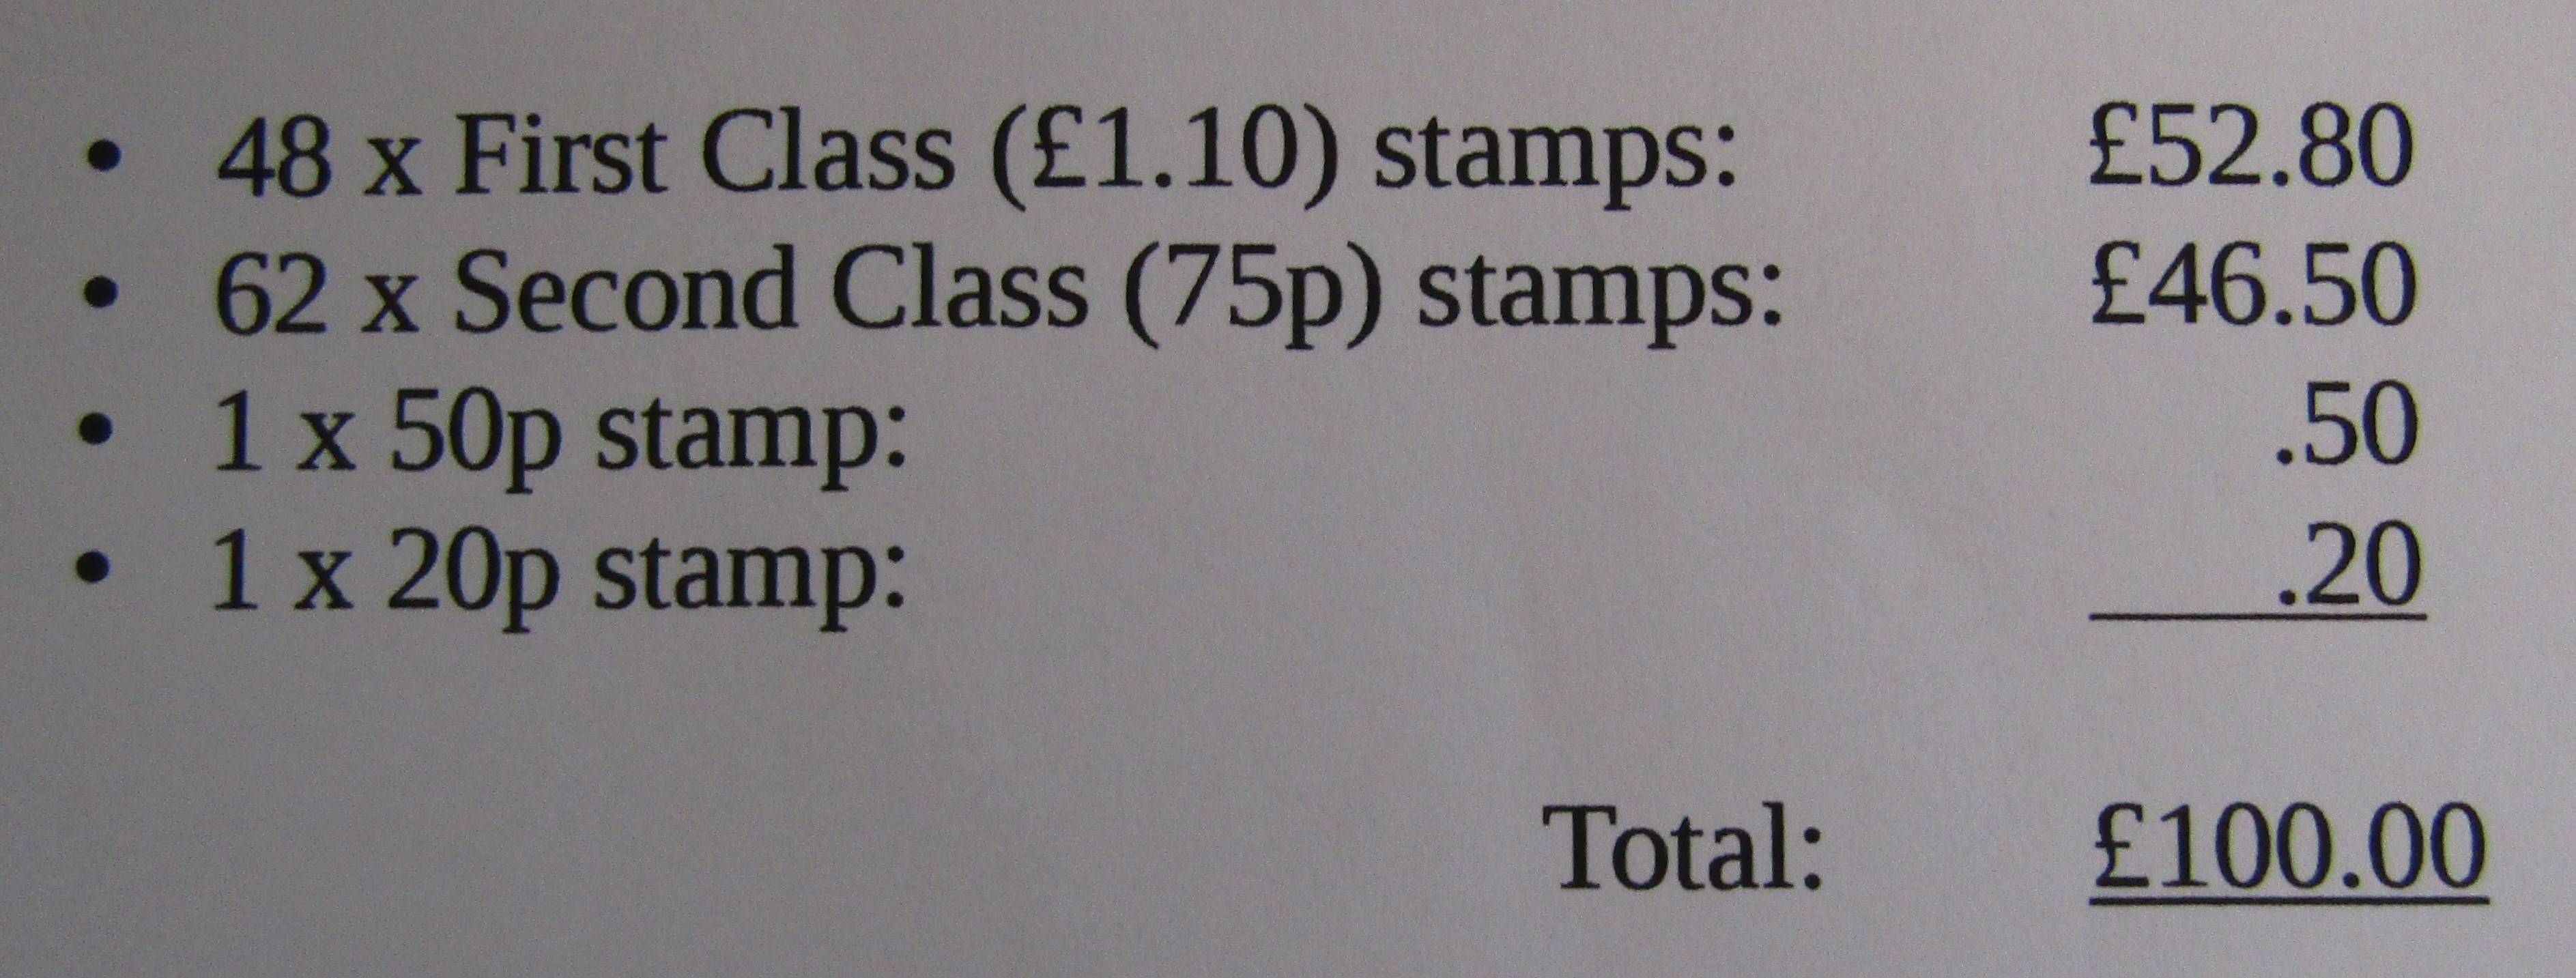 £100 in Value Mint Stamps - Image 6 of 6